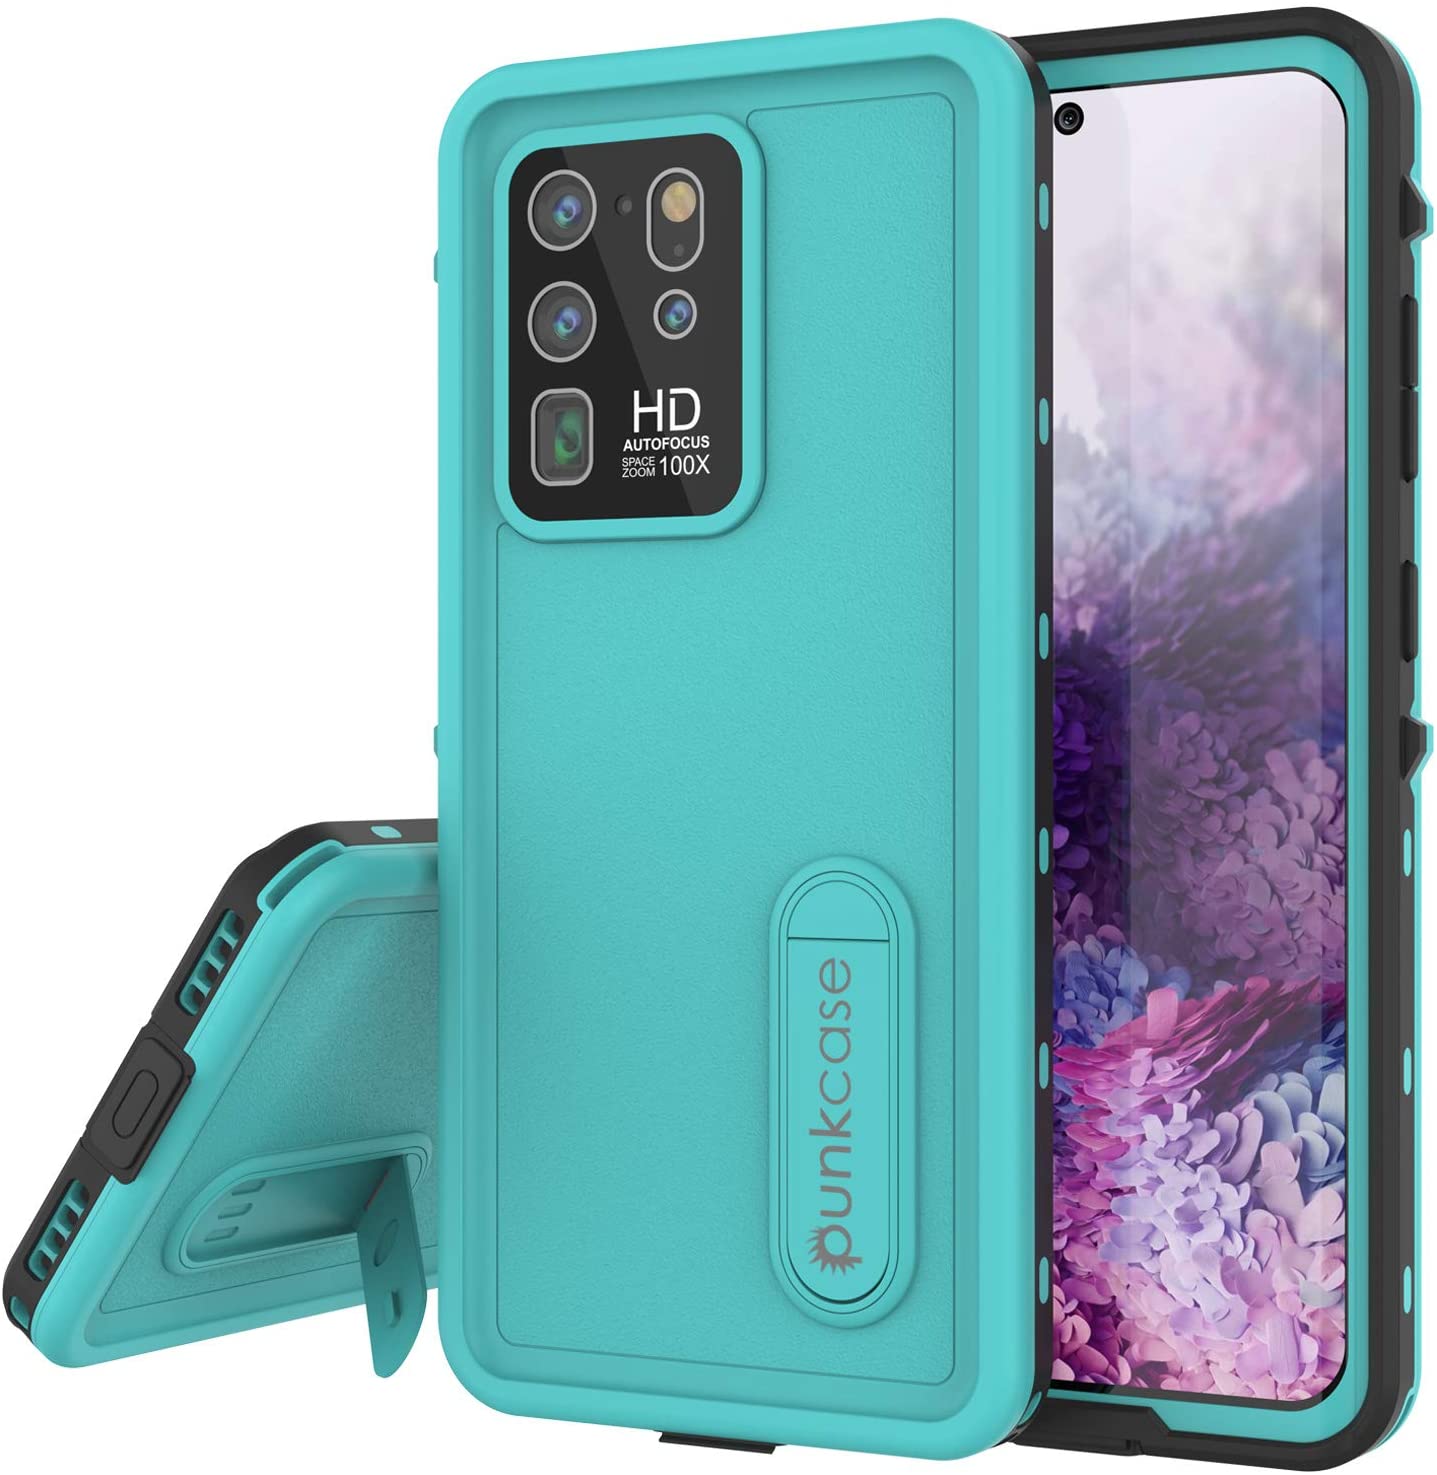 Galaxy S20 Ultra Waterproof Case, Punkcase [KickStud Series] Armor Cover [Teal] (Color in image: Teal)